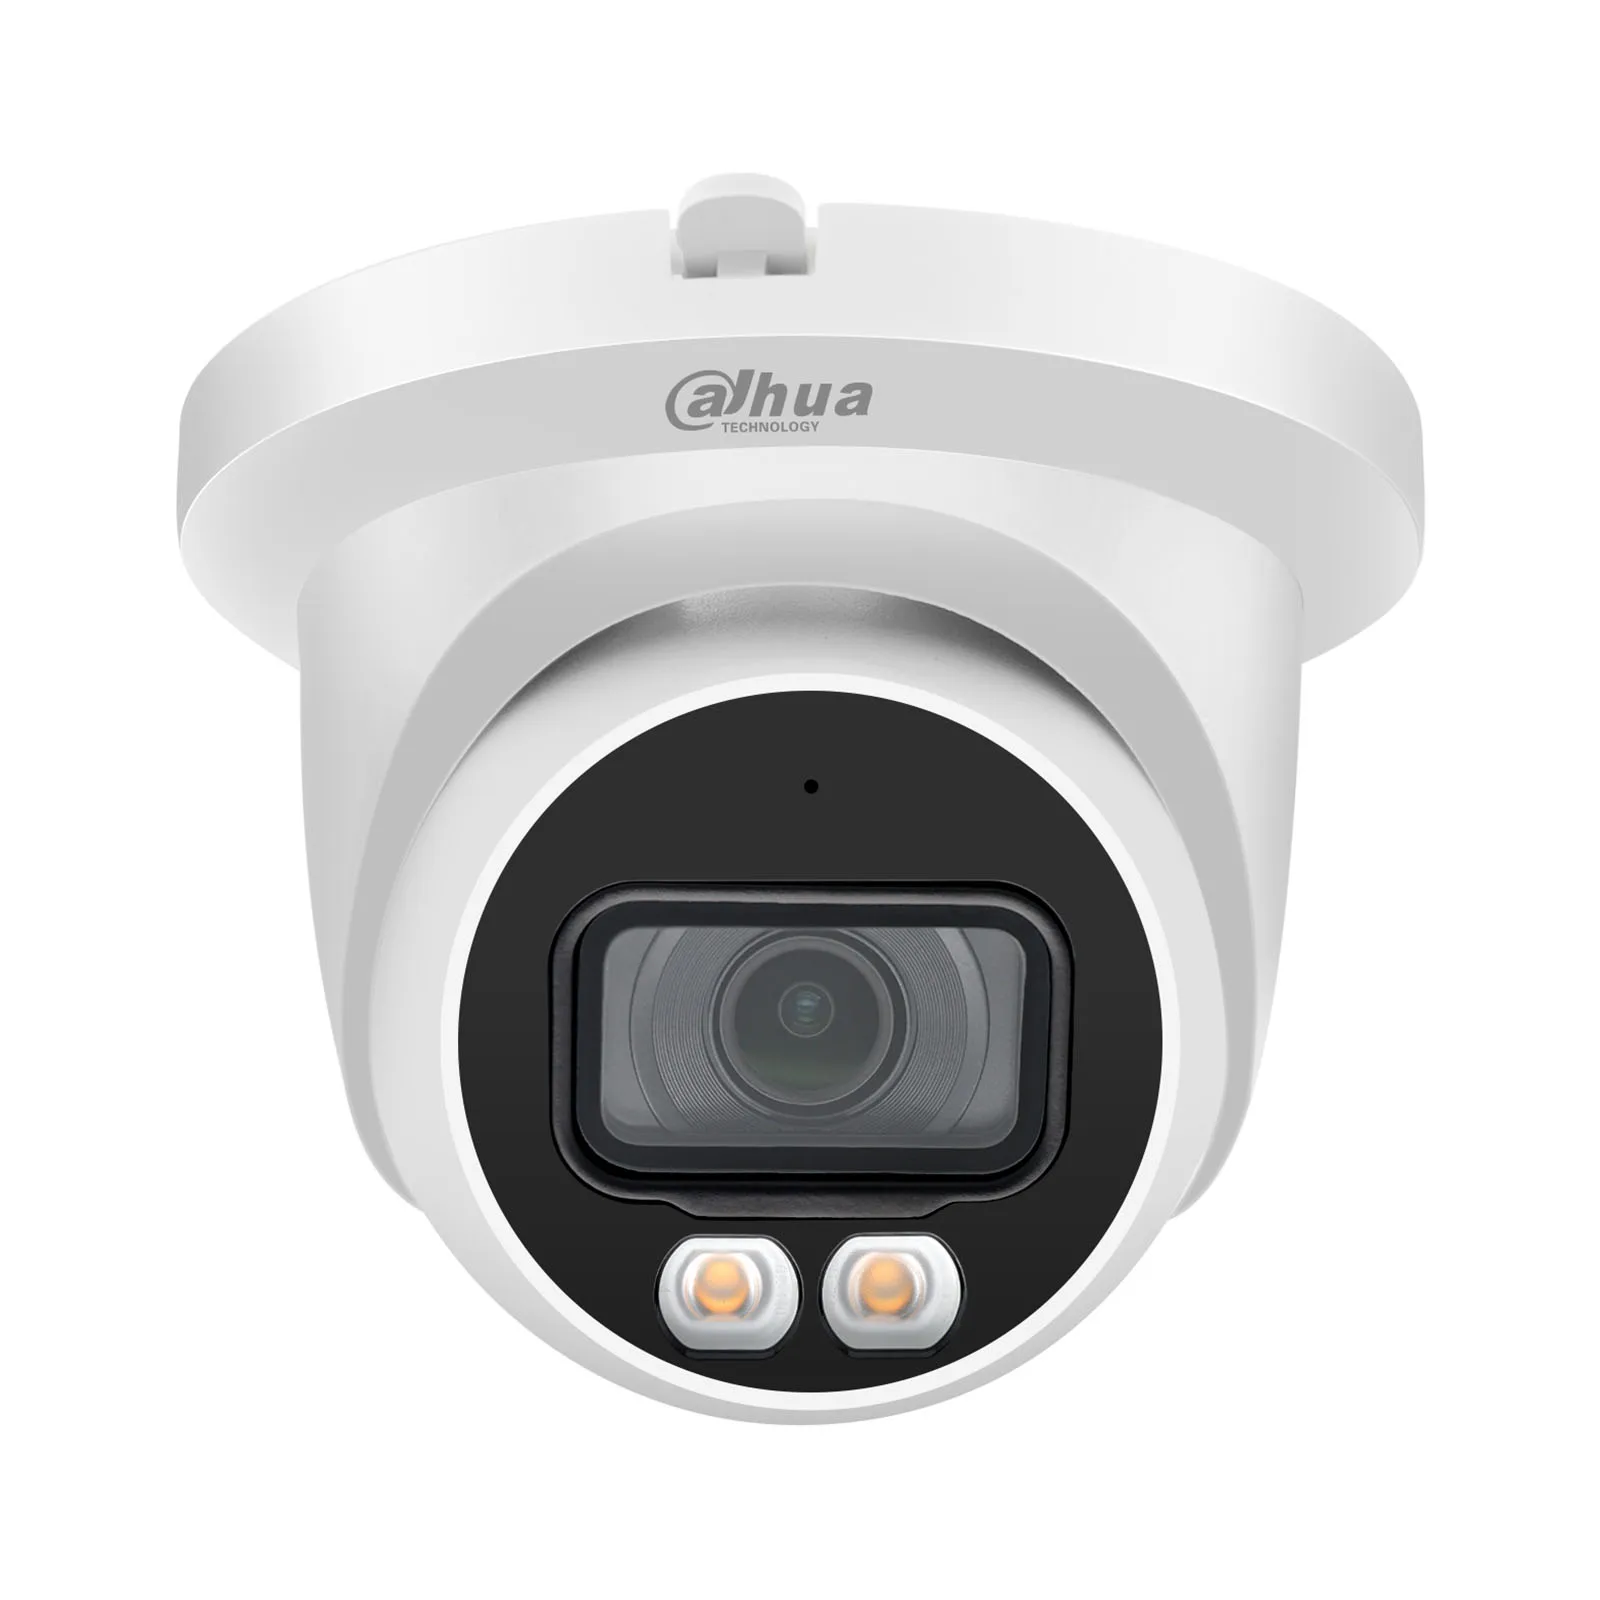 dahua full color ip camera 5mp ipc hdw3549tm as led built in mic warm led support sd card colorvu 12v dcpoe ip67 wizsense cam free global shipping